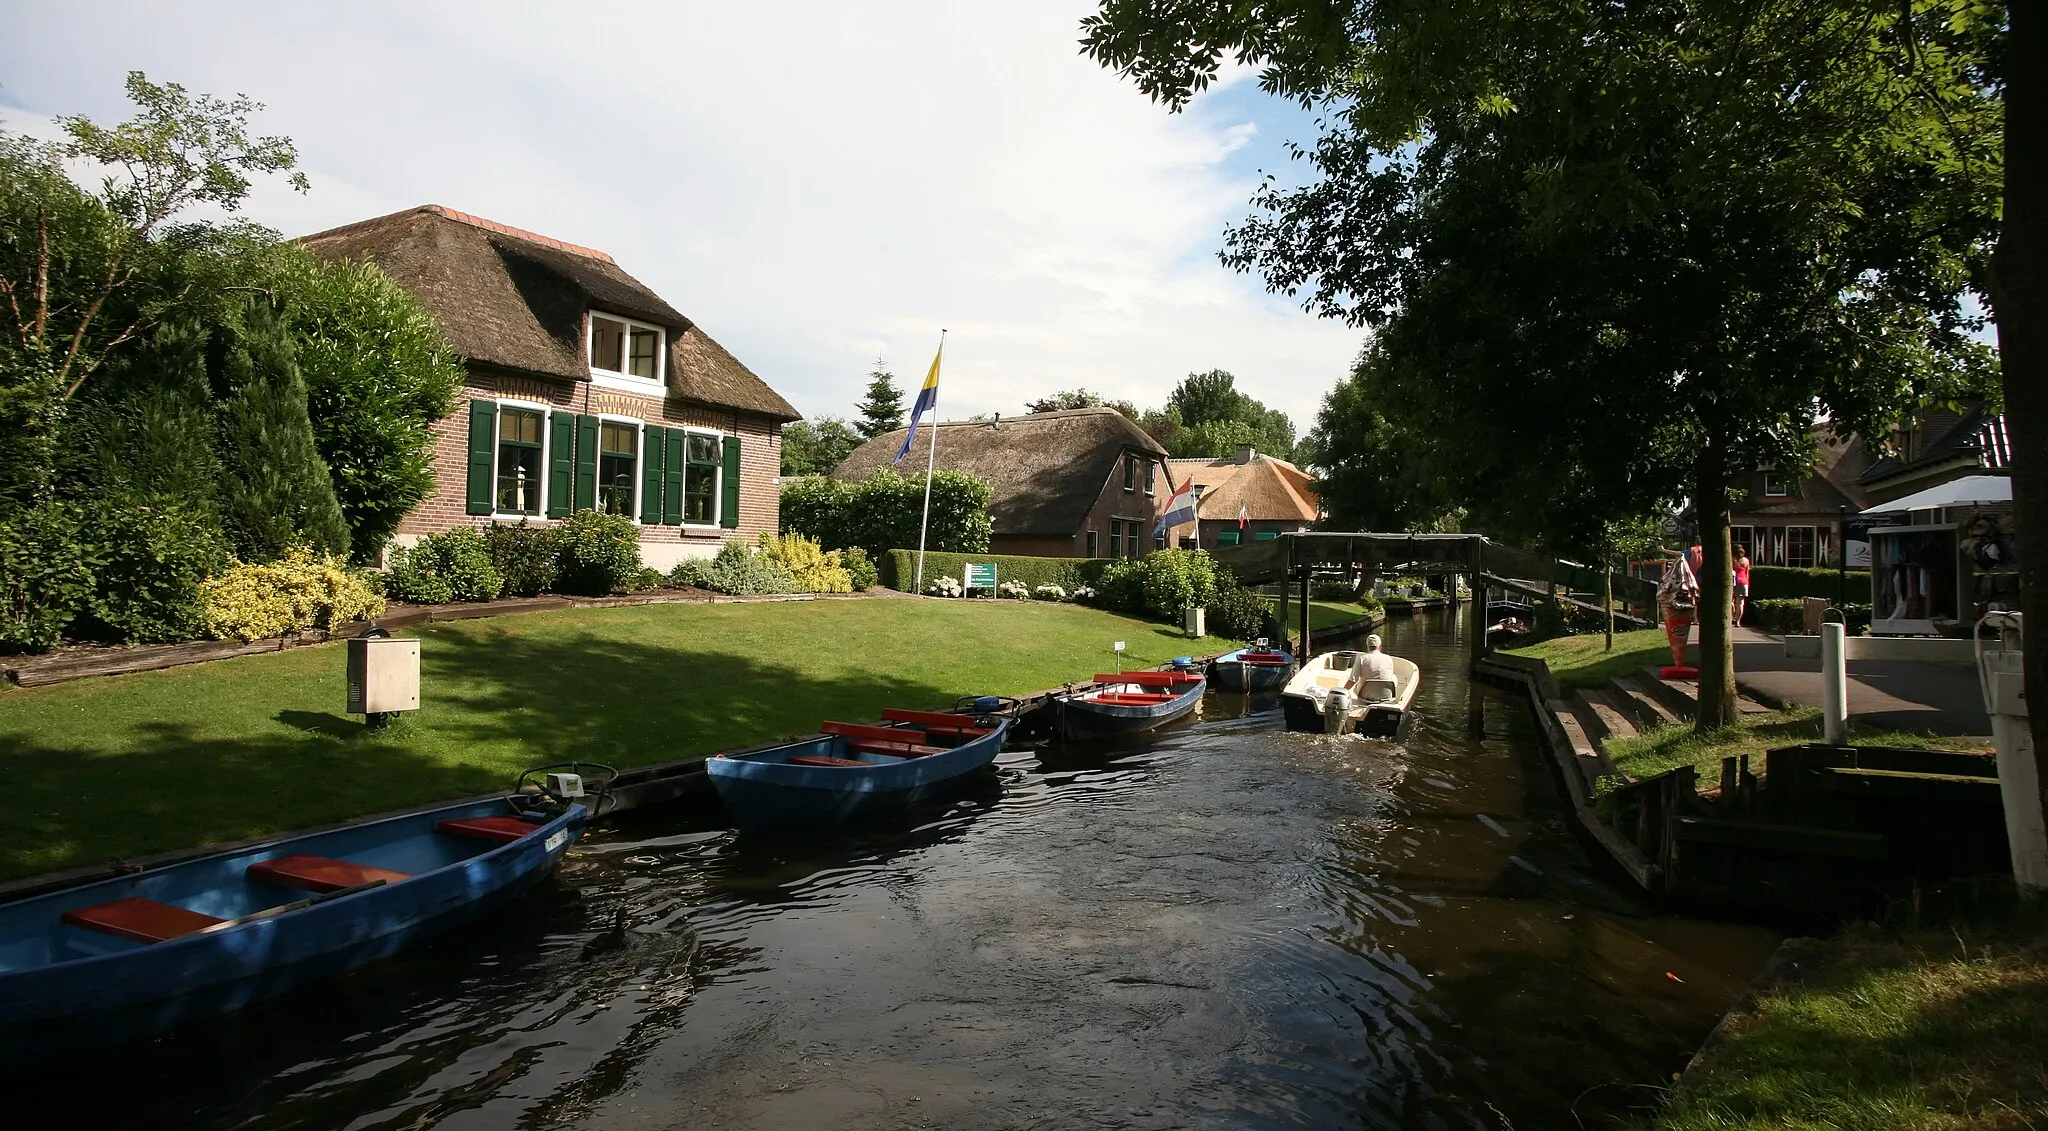 Photo showing: Canals in Giethoorn, Netherlands; a.k.a. the Venice of the North / Venice of the Netherlands